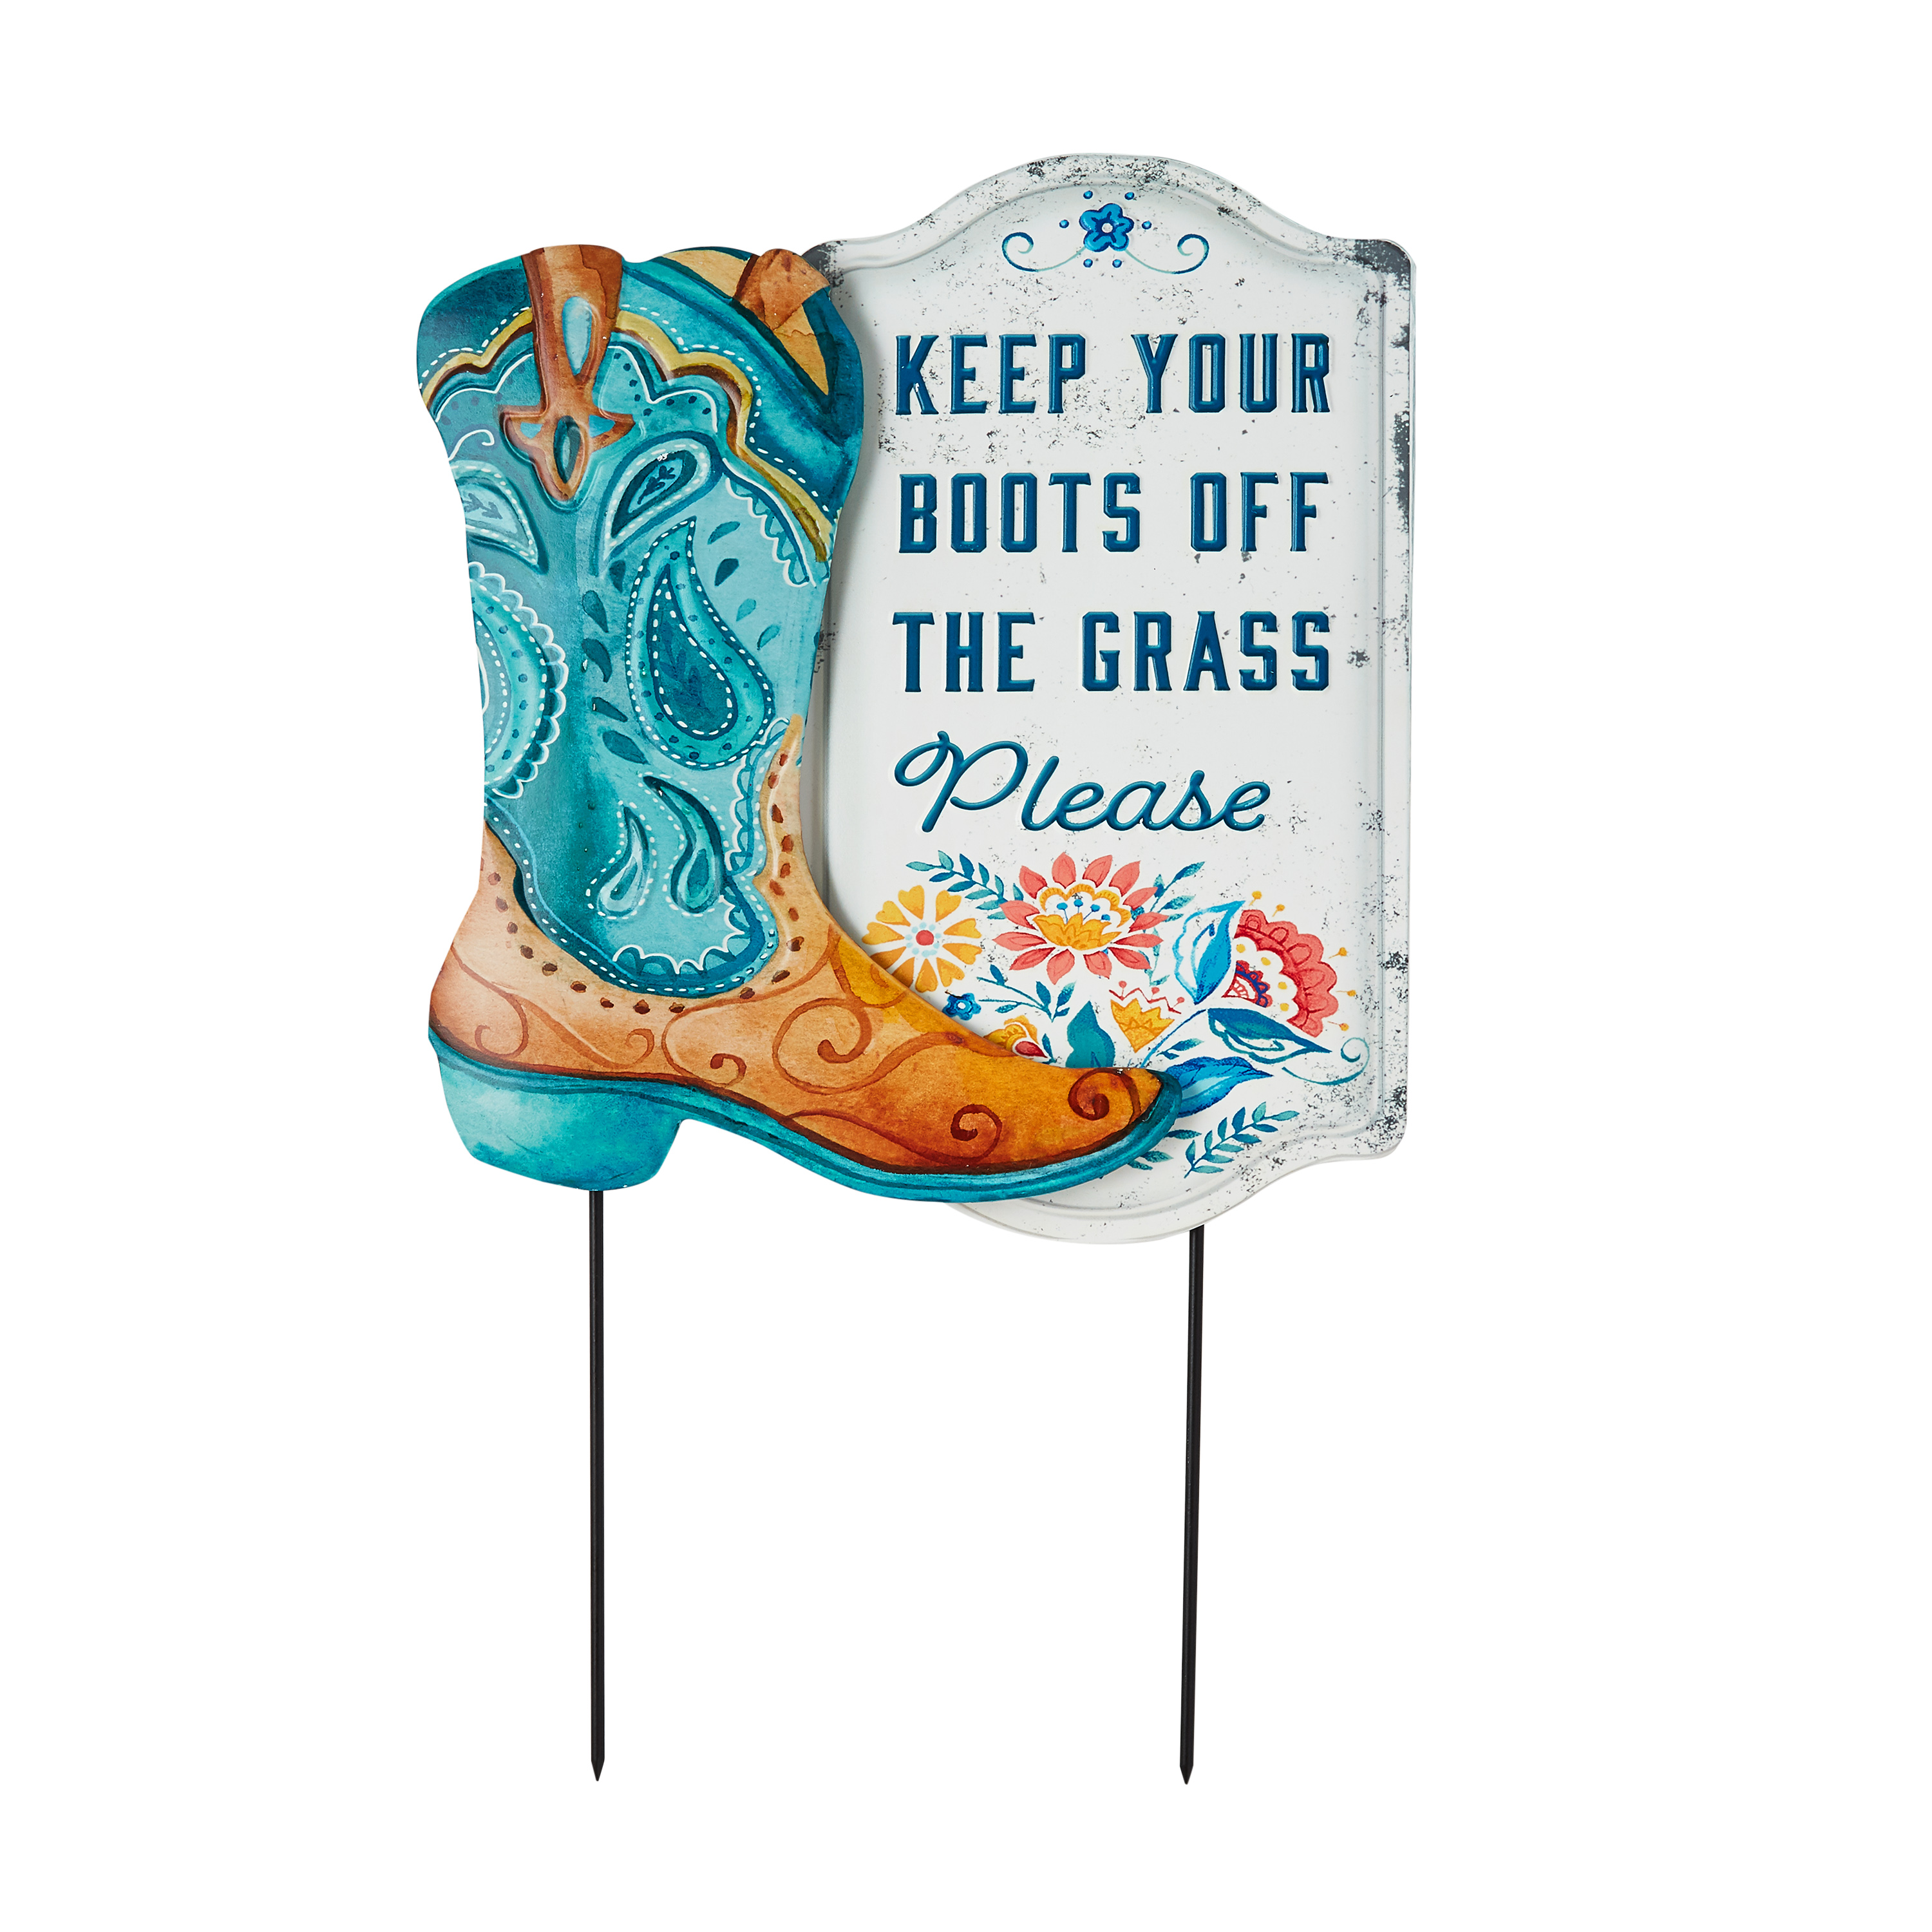 The Pioneer Woman Boots Off the Grass Multicolor Metal Outdoor Garden Stake - image 1 of 9